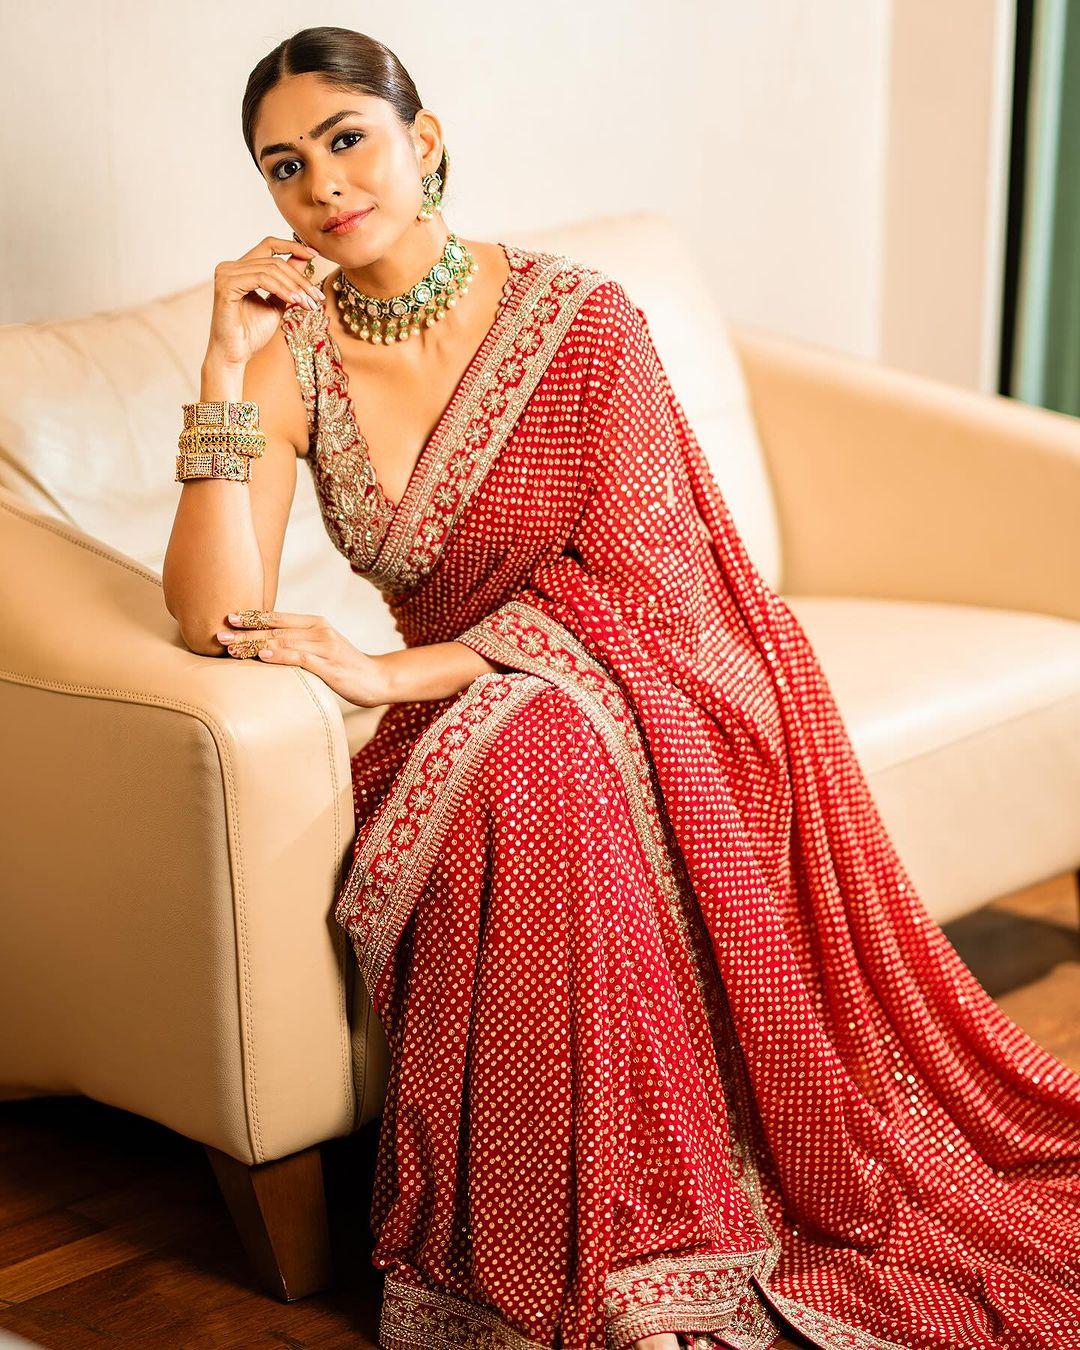 One can never go wrong with red, especially in ethnic wear. In this look, Mrunal wore a bright red saree with a beautiful golden border and stylish polka-dotted prints all over the six-yard